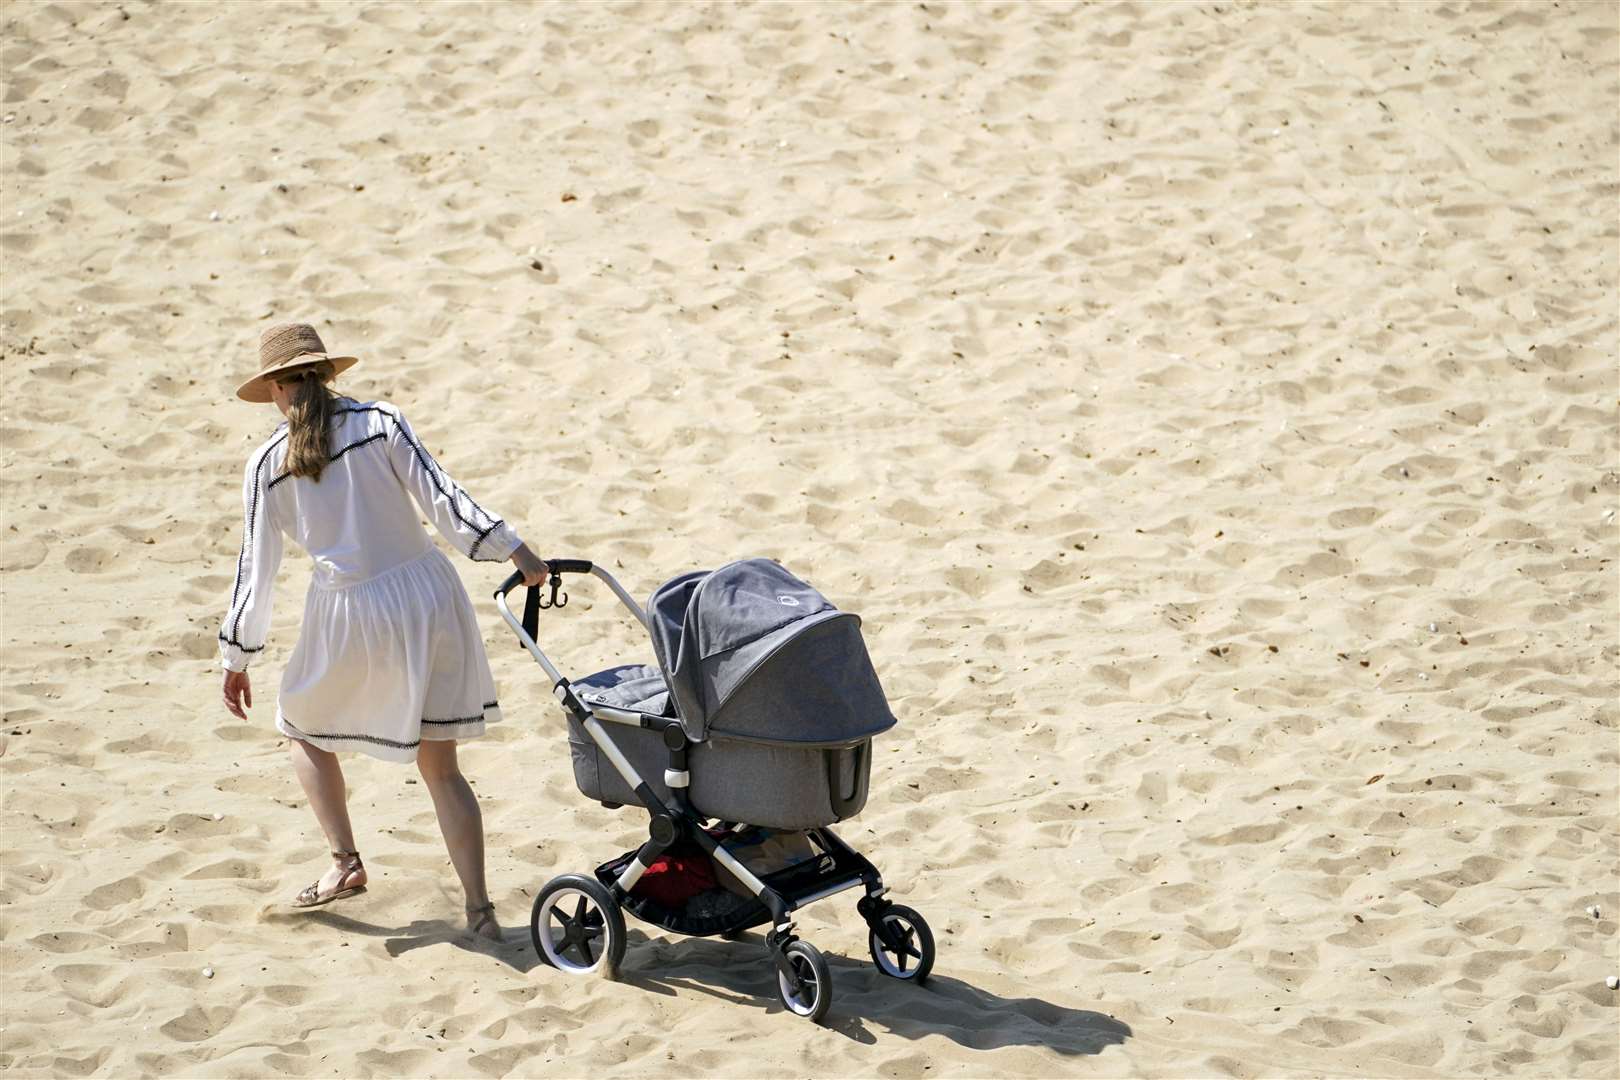 A woman pulls a pushchair across the beach in Bournemouth (Steve Parsons/PA)